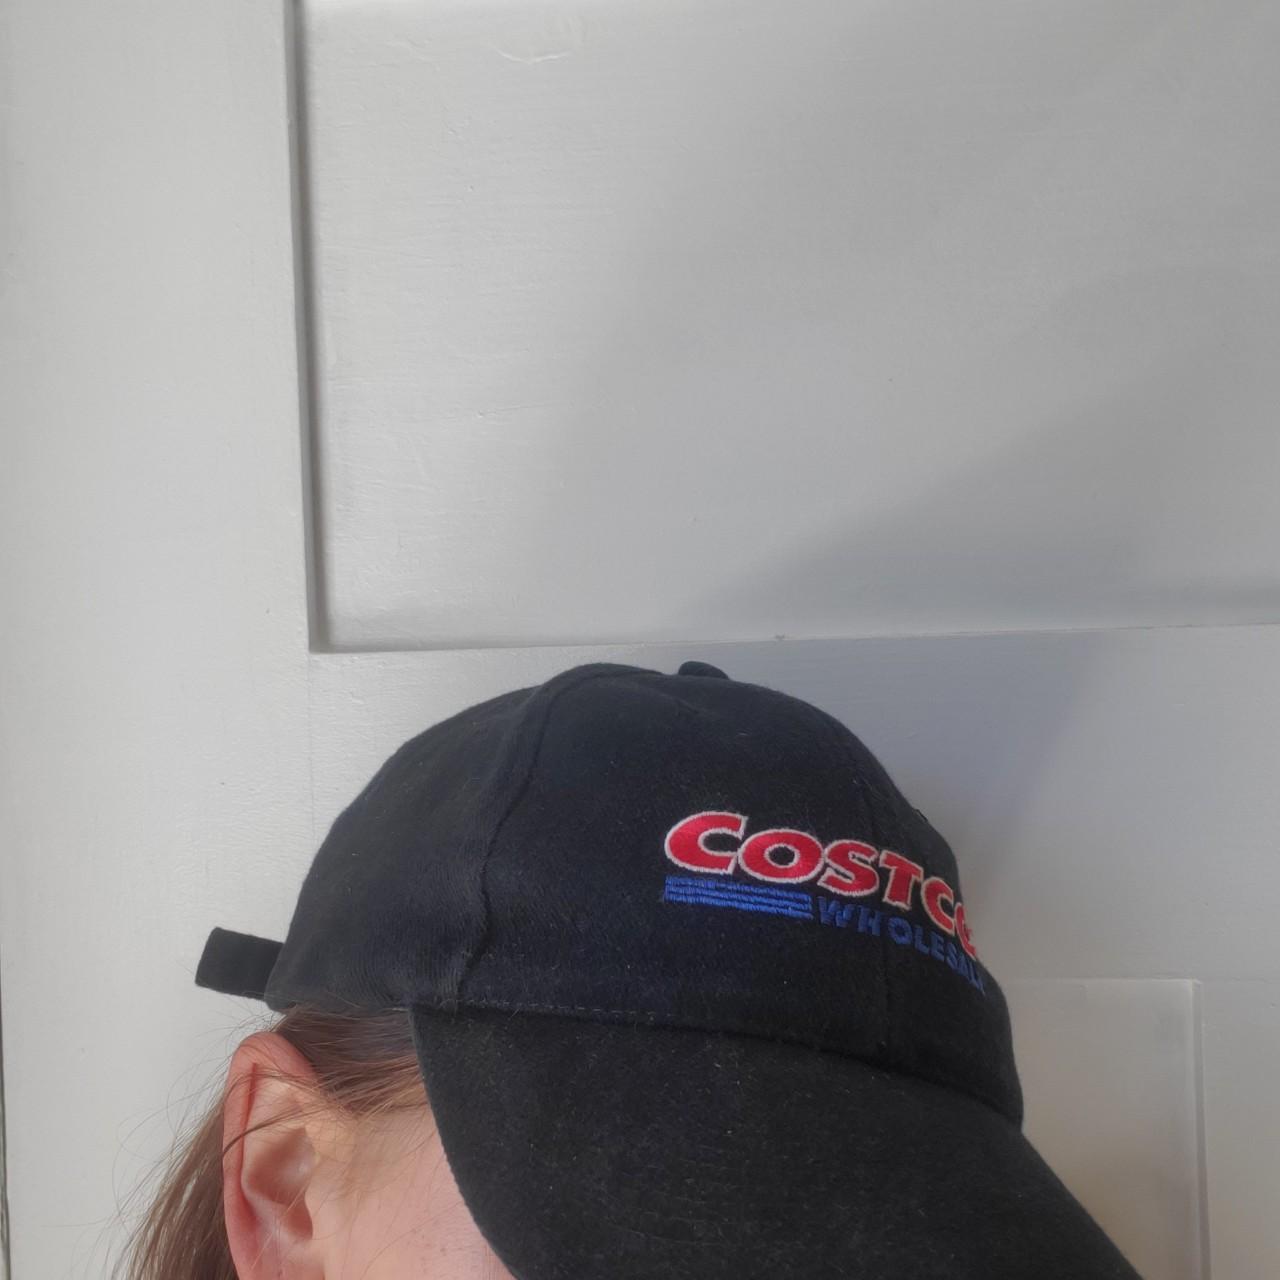 Costco Men's Black and Red Hat (4)